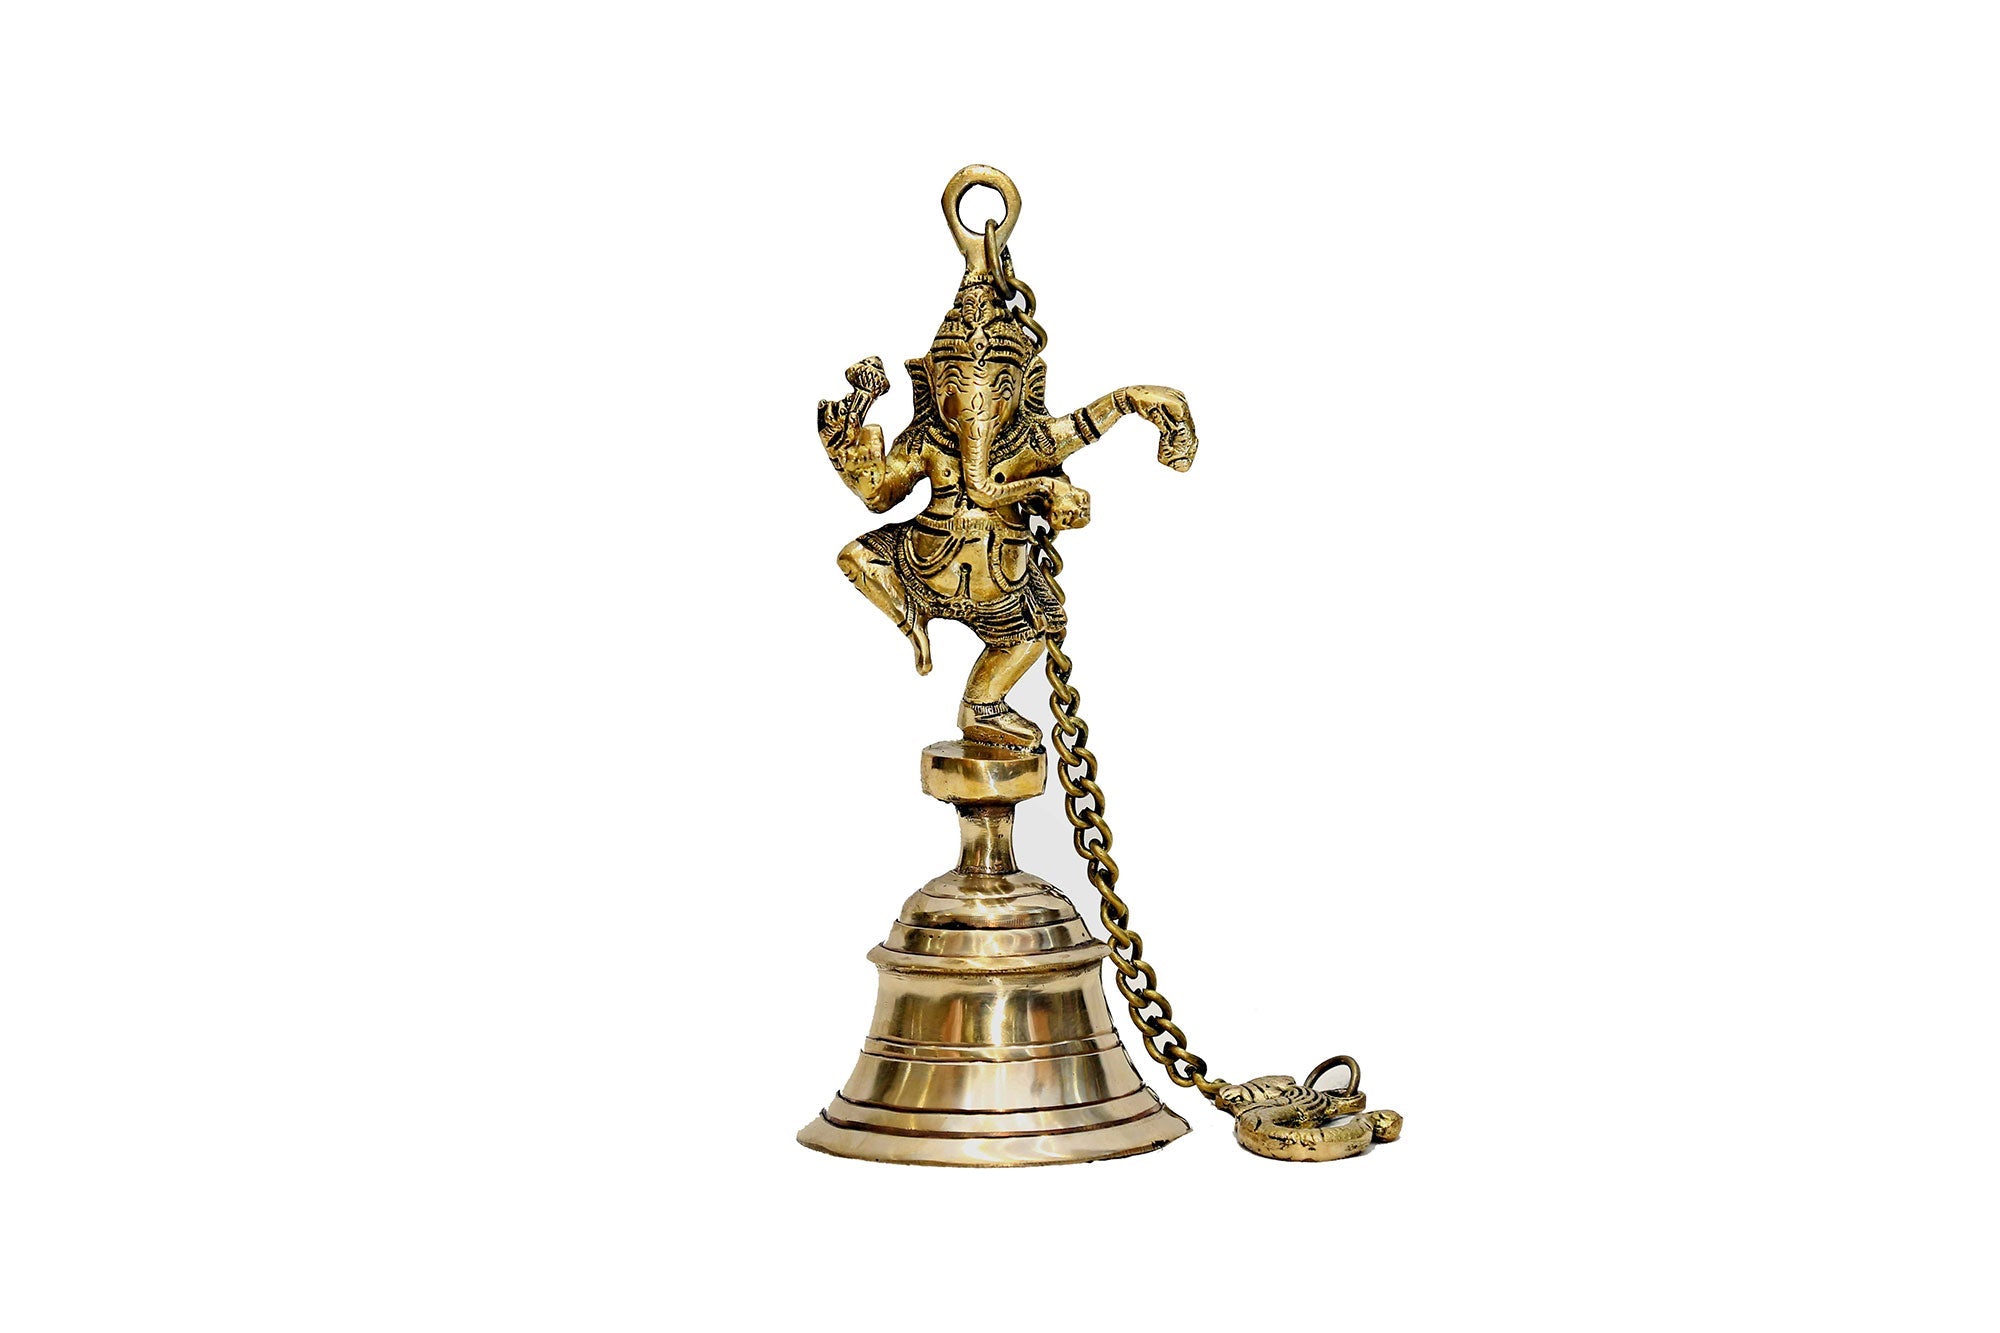 Brass Ganesha Statue with Temple Bells and Chain